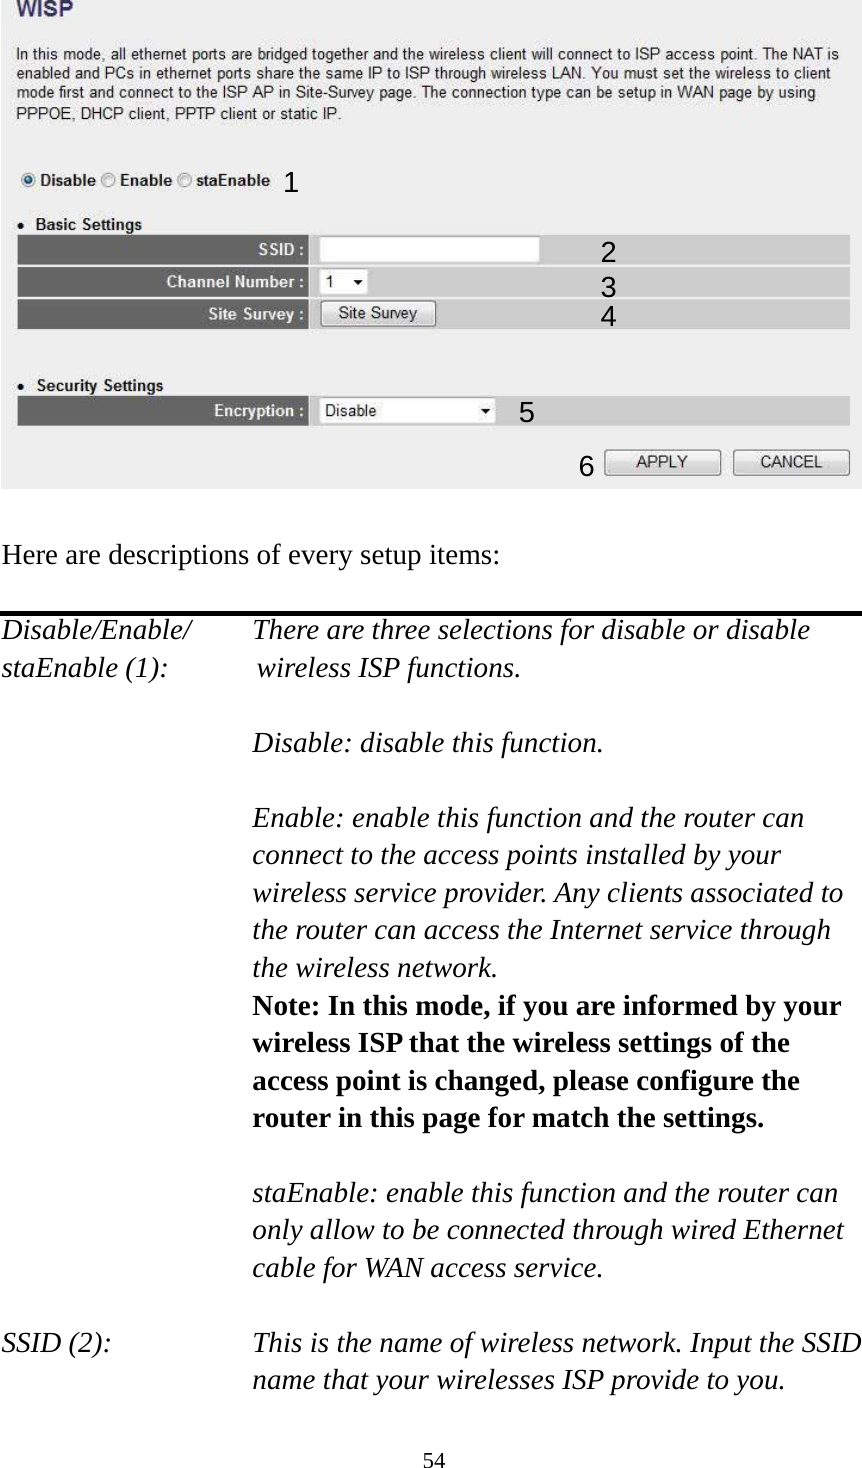 54   Here are descriptions of every setup items:  Disable/Enable/    There are three selections for disable or disable   staEnable (1):      wireless ISP functions.  Disable: disable this function.  Enable: enable this function and the router can connect to the access points installed by your wireless service provider. Any clients associated to the router can access the Internet service through the wireless network. Note: In this mode, if you are informed by your wireless ISP that the wireless settings of the access point is changed, please configure the router in this page for match the settings.  staEnable: enable this function and the router can only allow to be connected through wired Ethernet cable for WAN access service.  SSID (2):    This is the name of wireless network. Input the SSID name that your wirelesses ISP provide to you. 1 2345 6